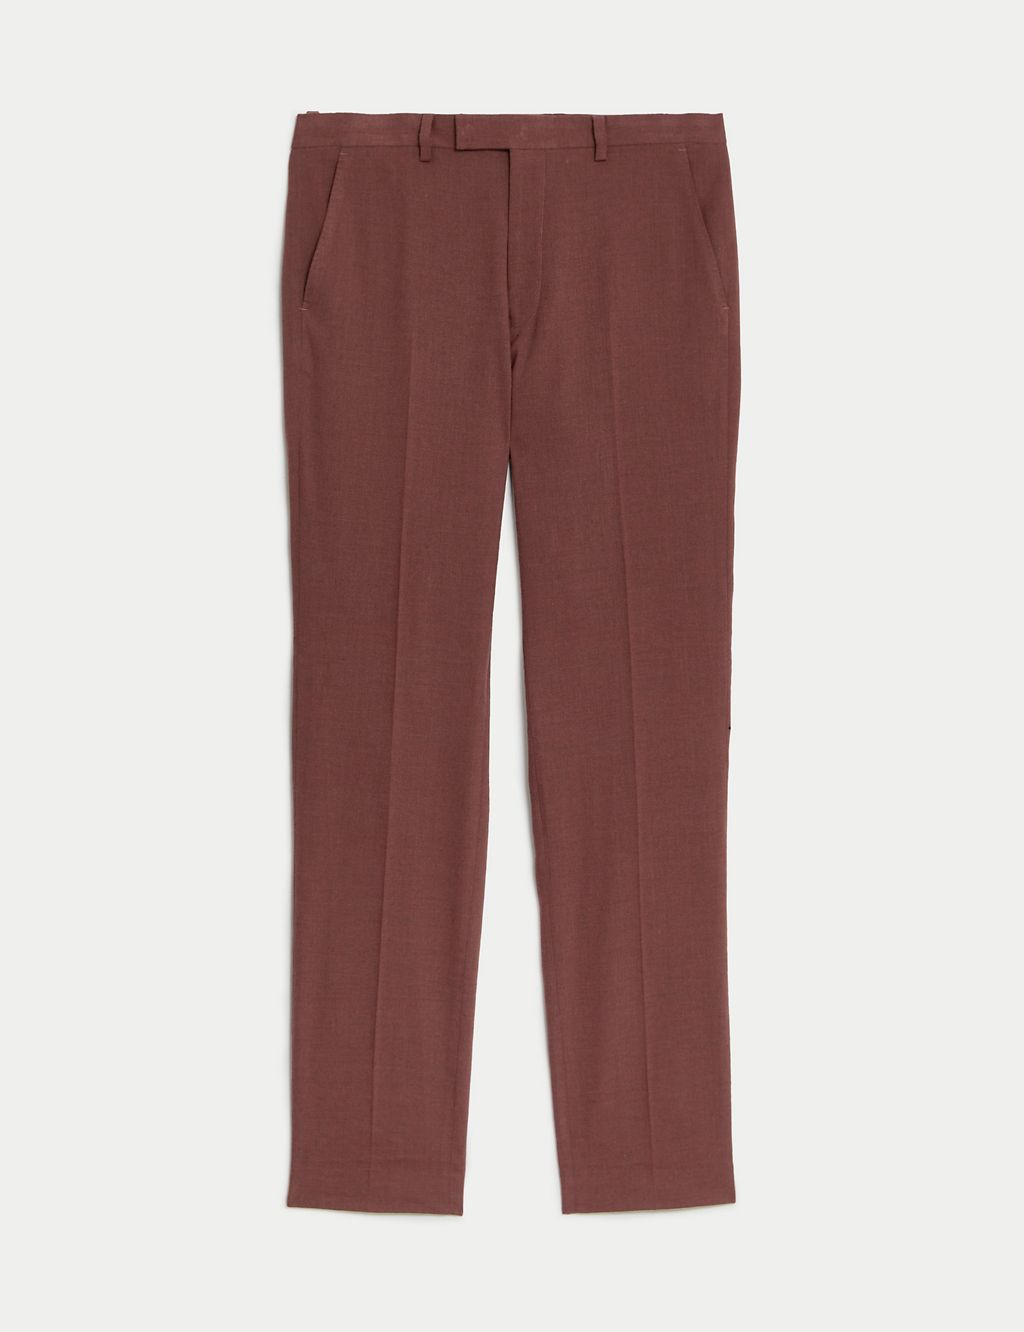 Tailored Fit Italian Linen Miracle™ Trousers 1 of 8